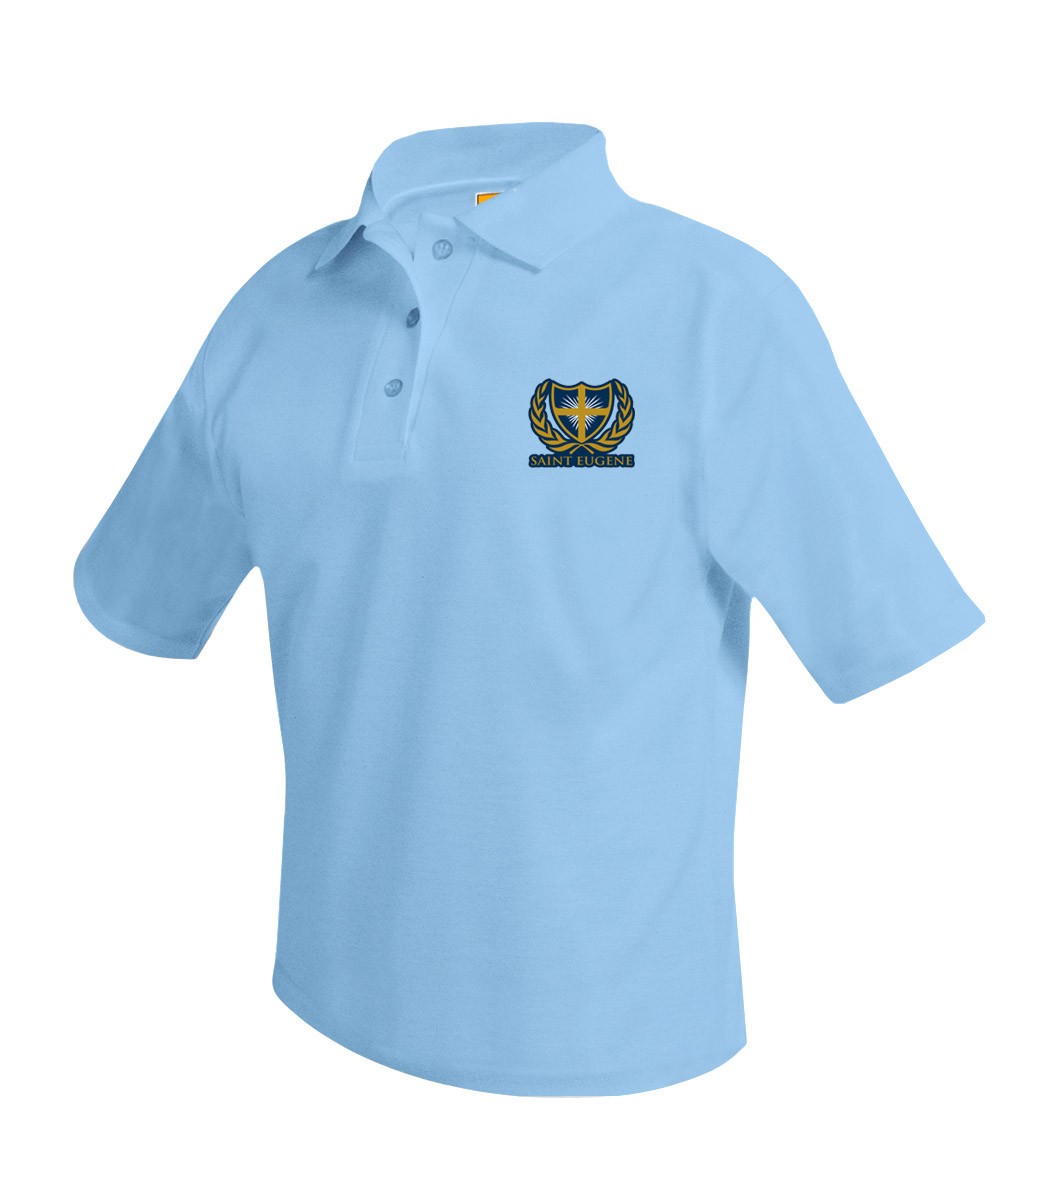 SES Staff Light Blue S/S Polo w/Logo - Please Allow 2-3 Weeks for Delivery